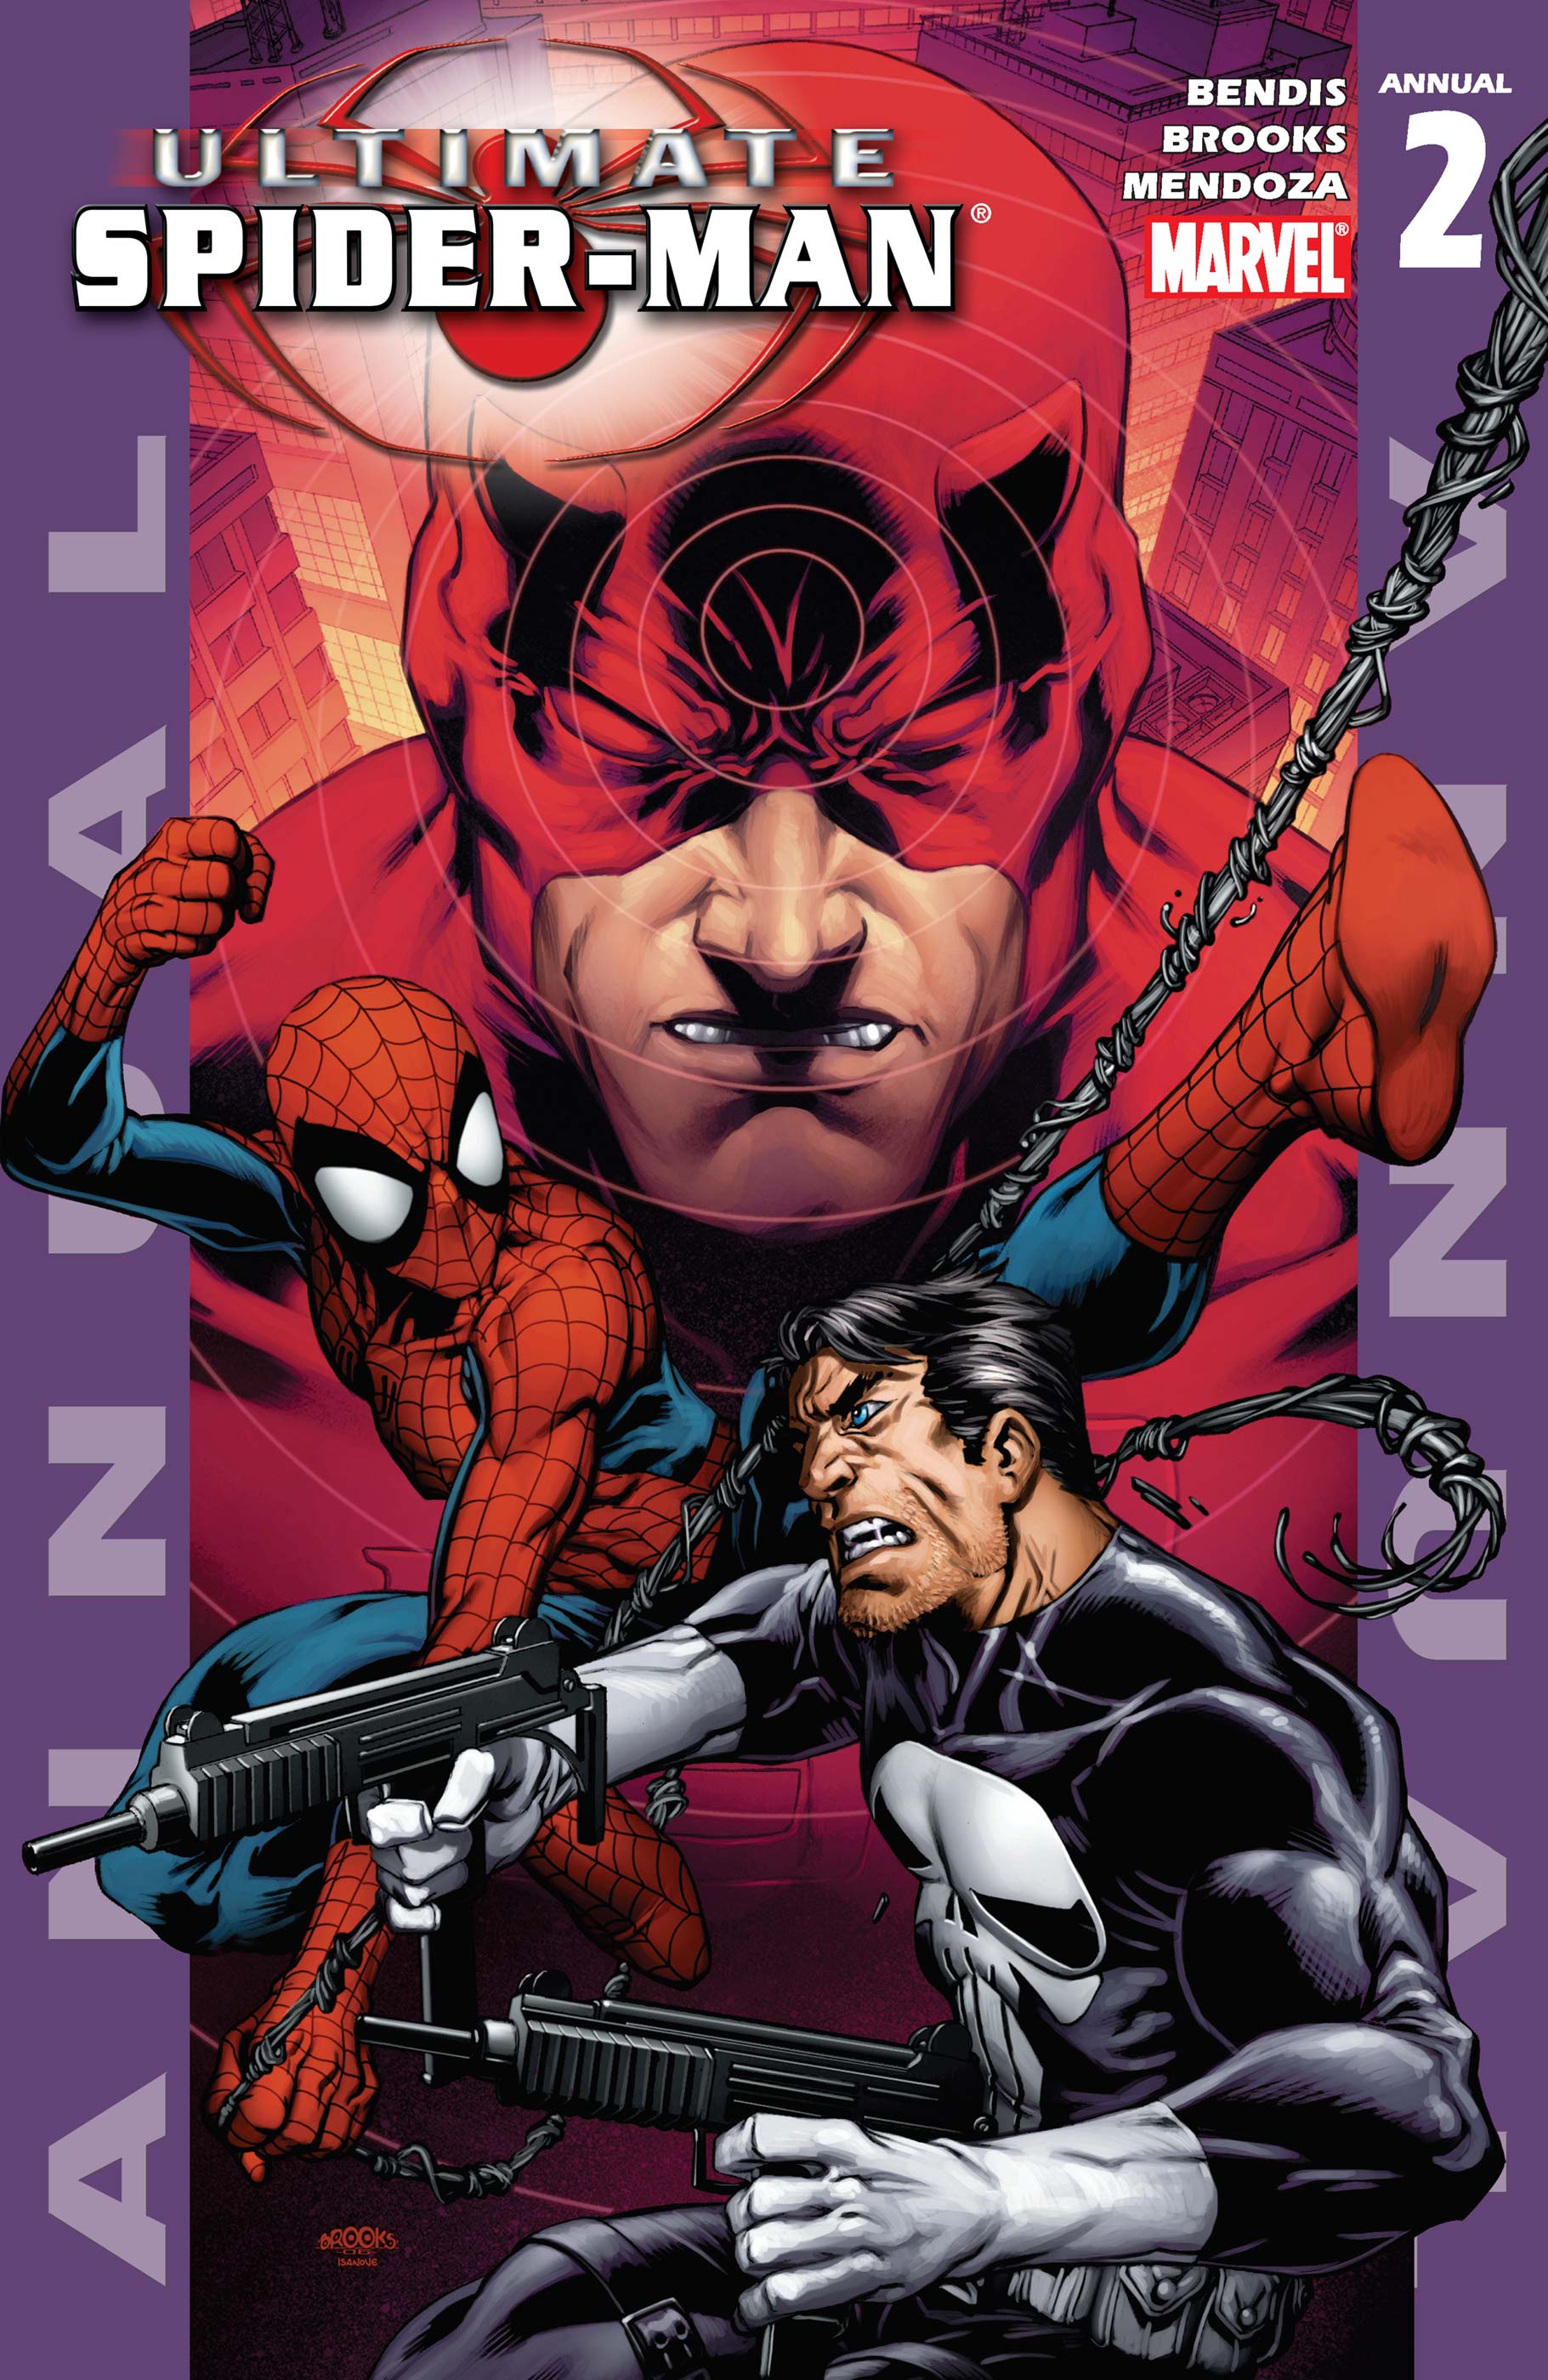 Ultimate Spider-Man Annual (2005) #2